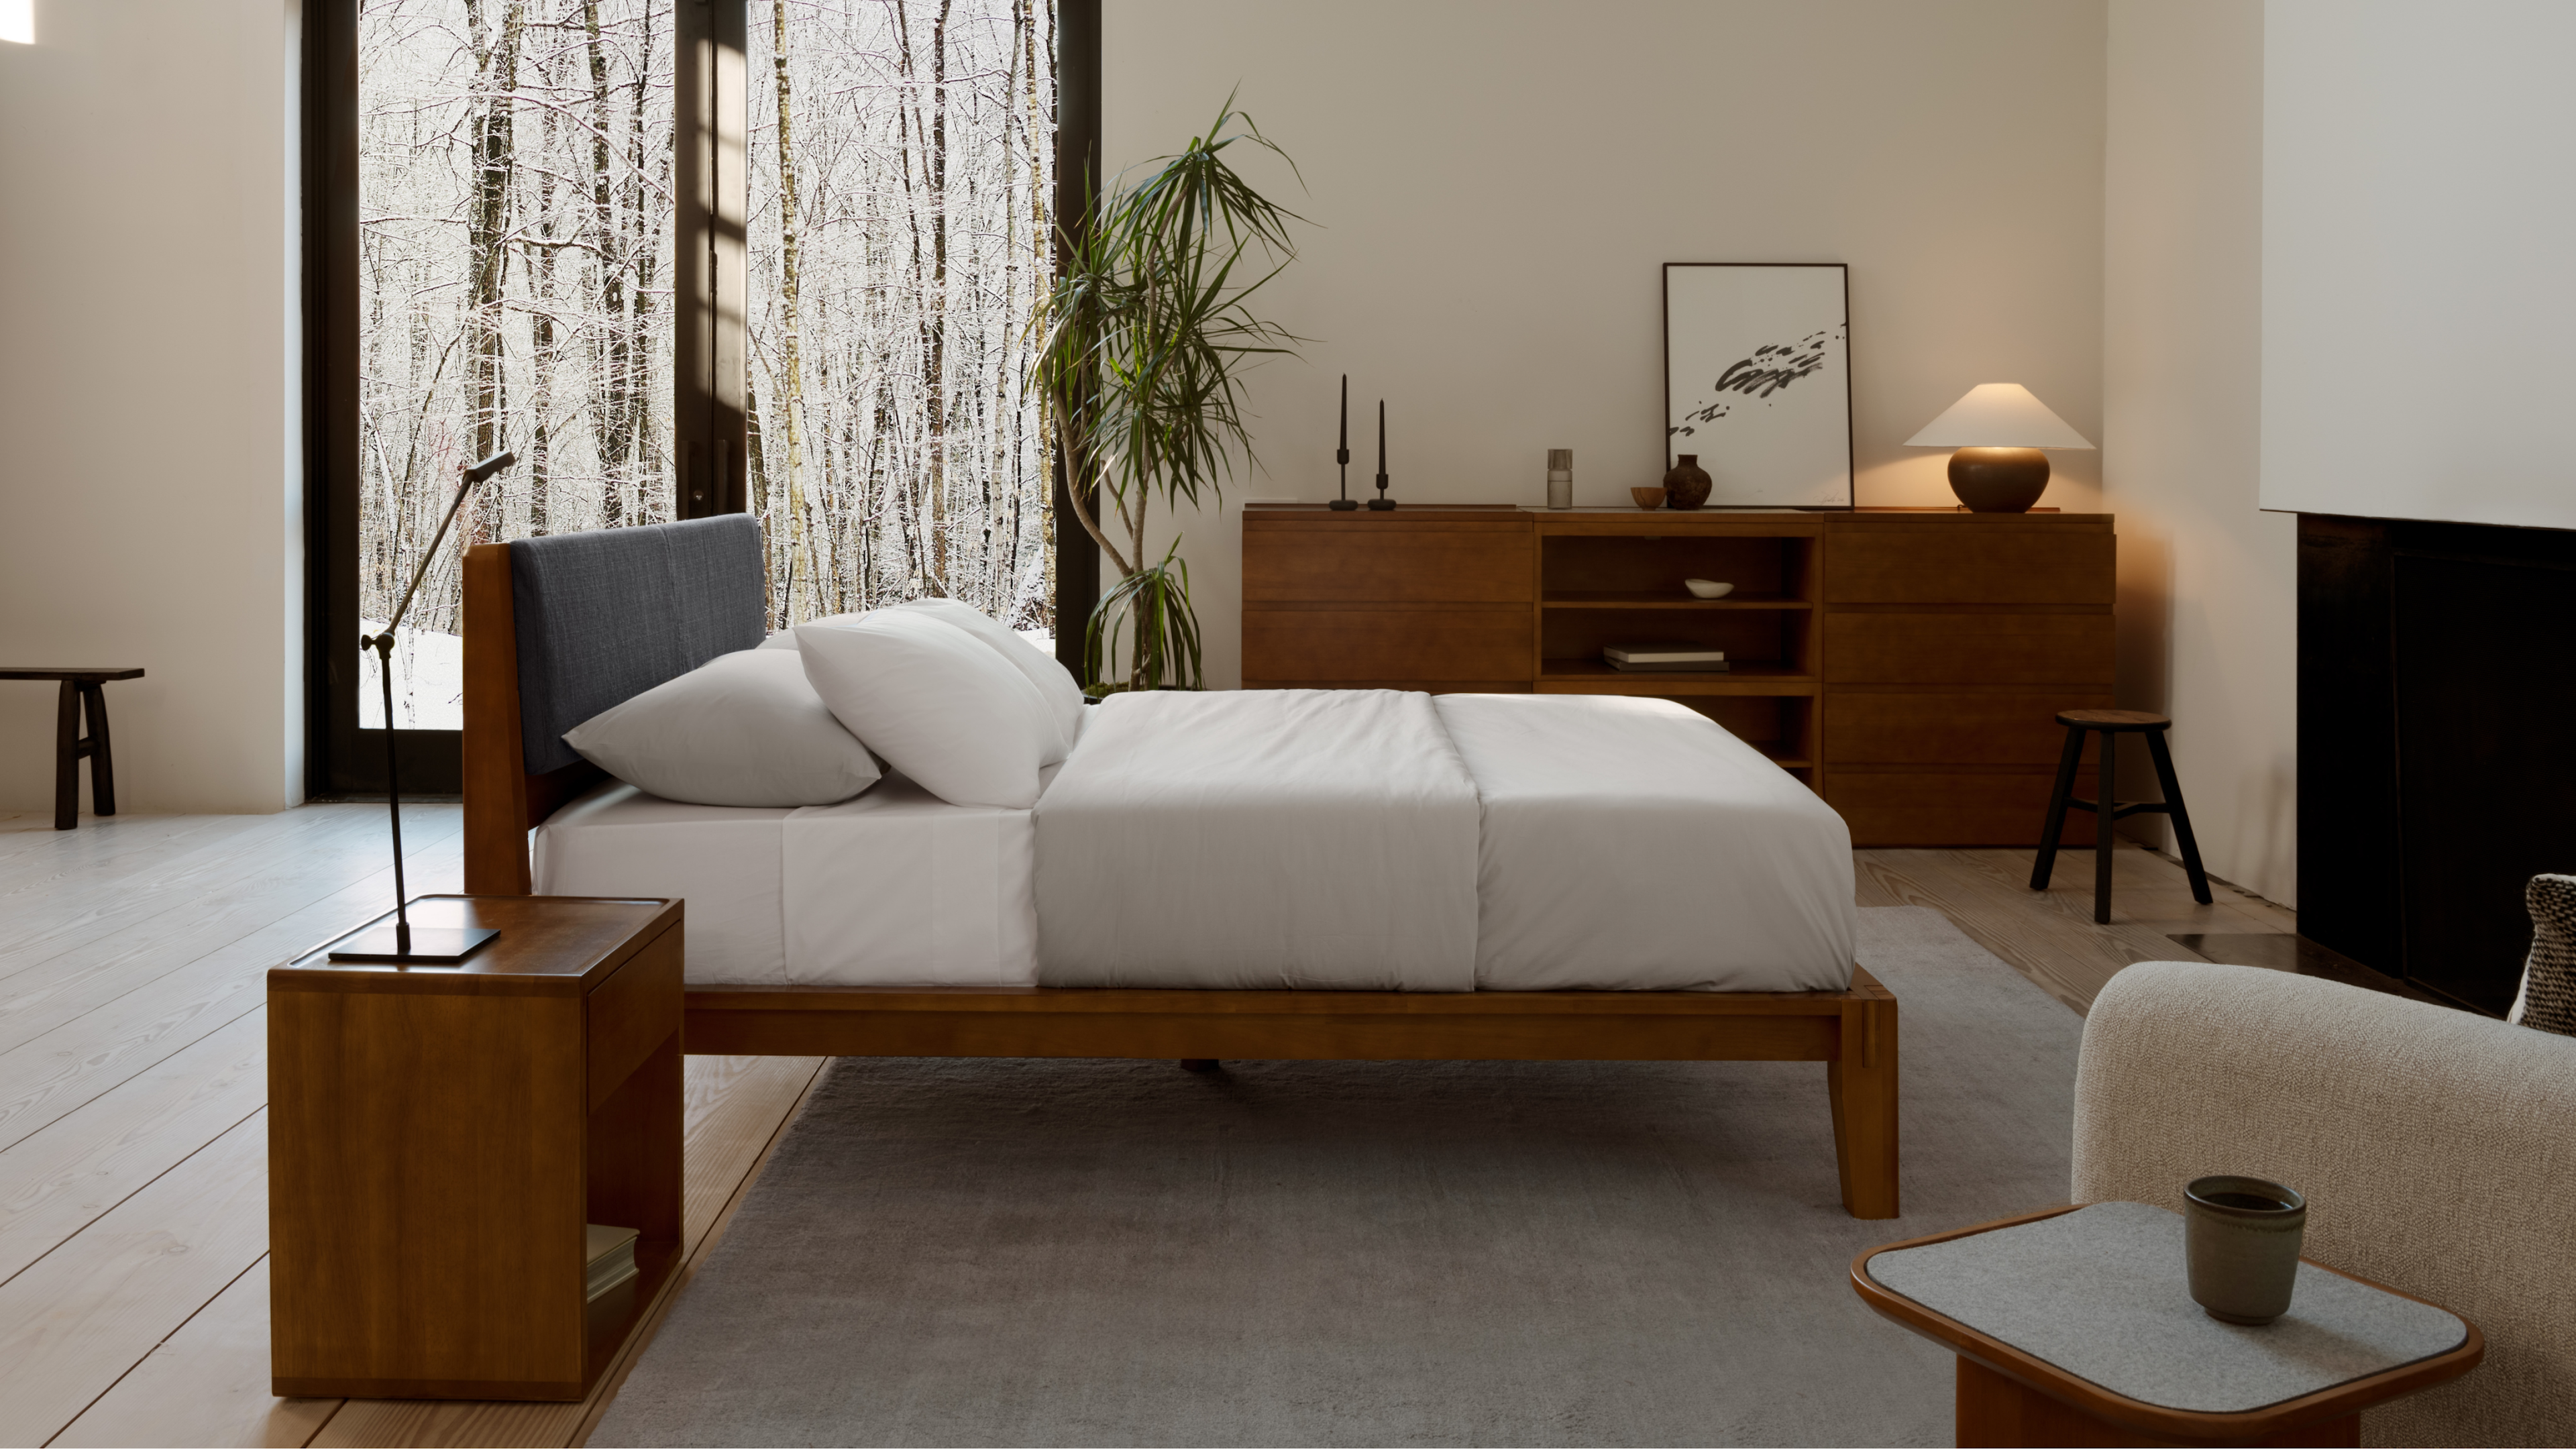 Beds LP: Look Book (The Bed + HB Cushion, in Walnut) - Desktop